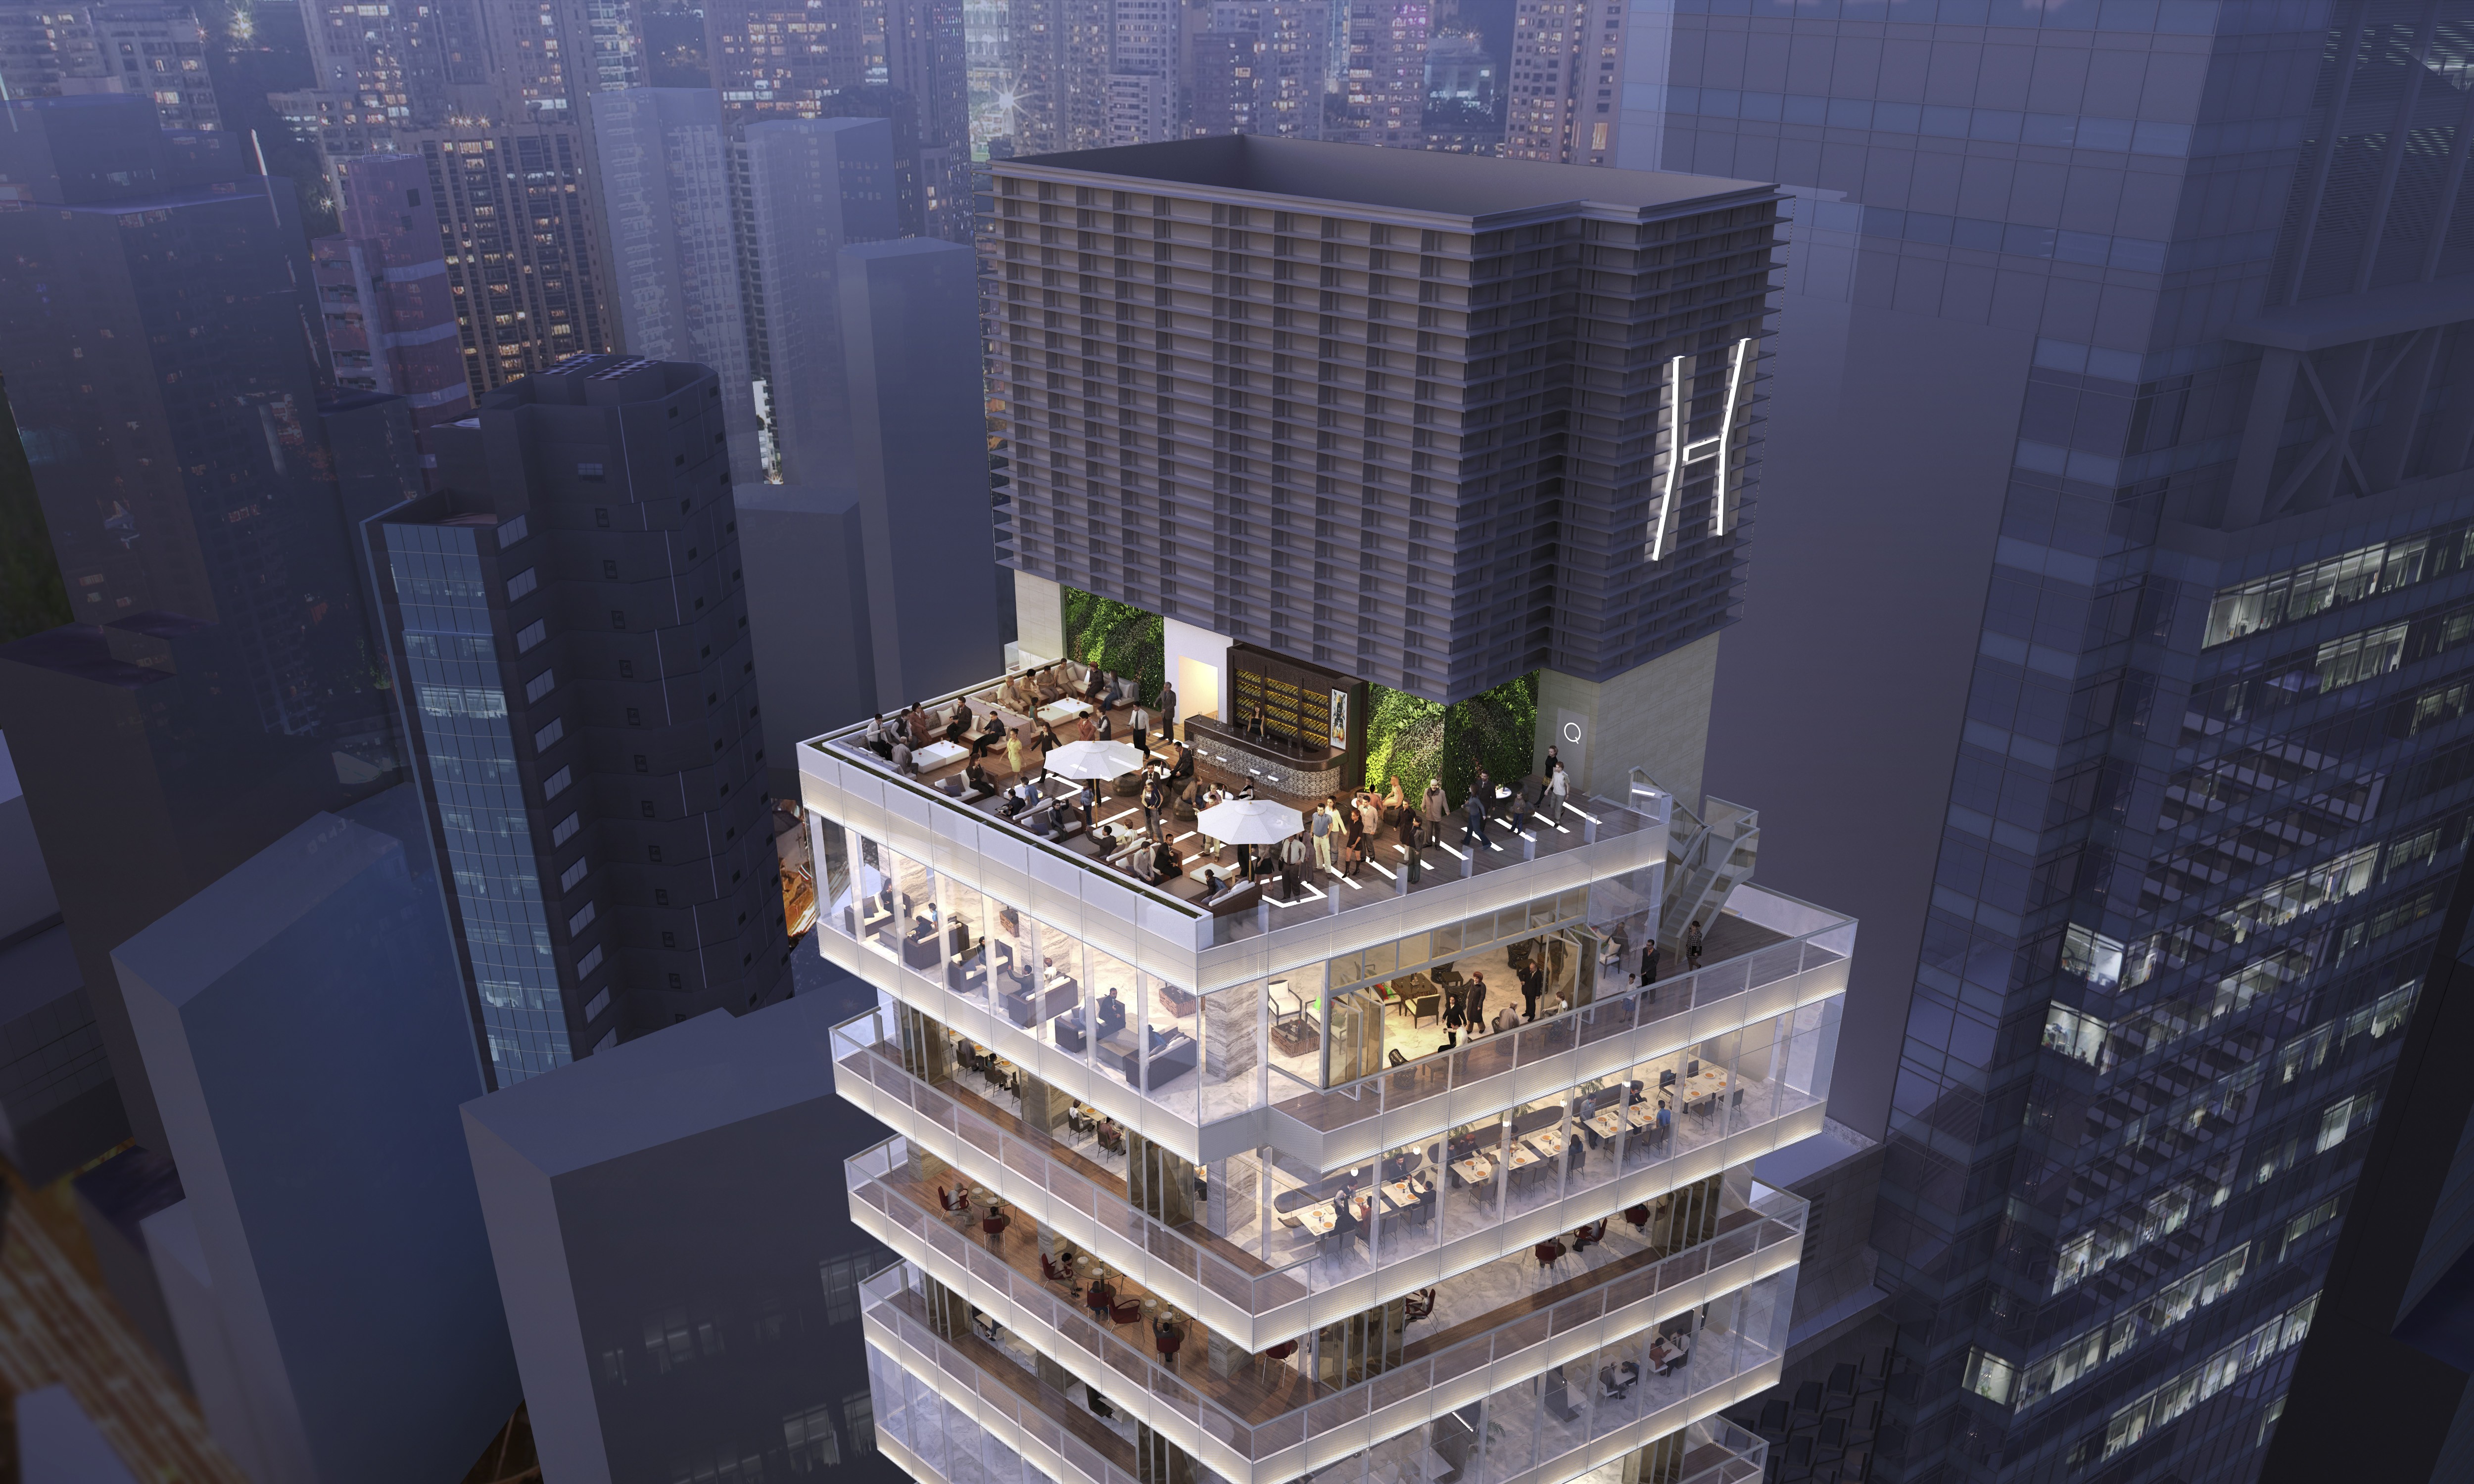 H Queens will offer 21 floors of innovative art gallery space when it opens in Hong Kong’s Central district. Image: CL3 Architects